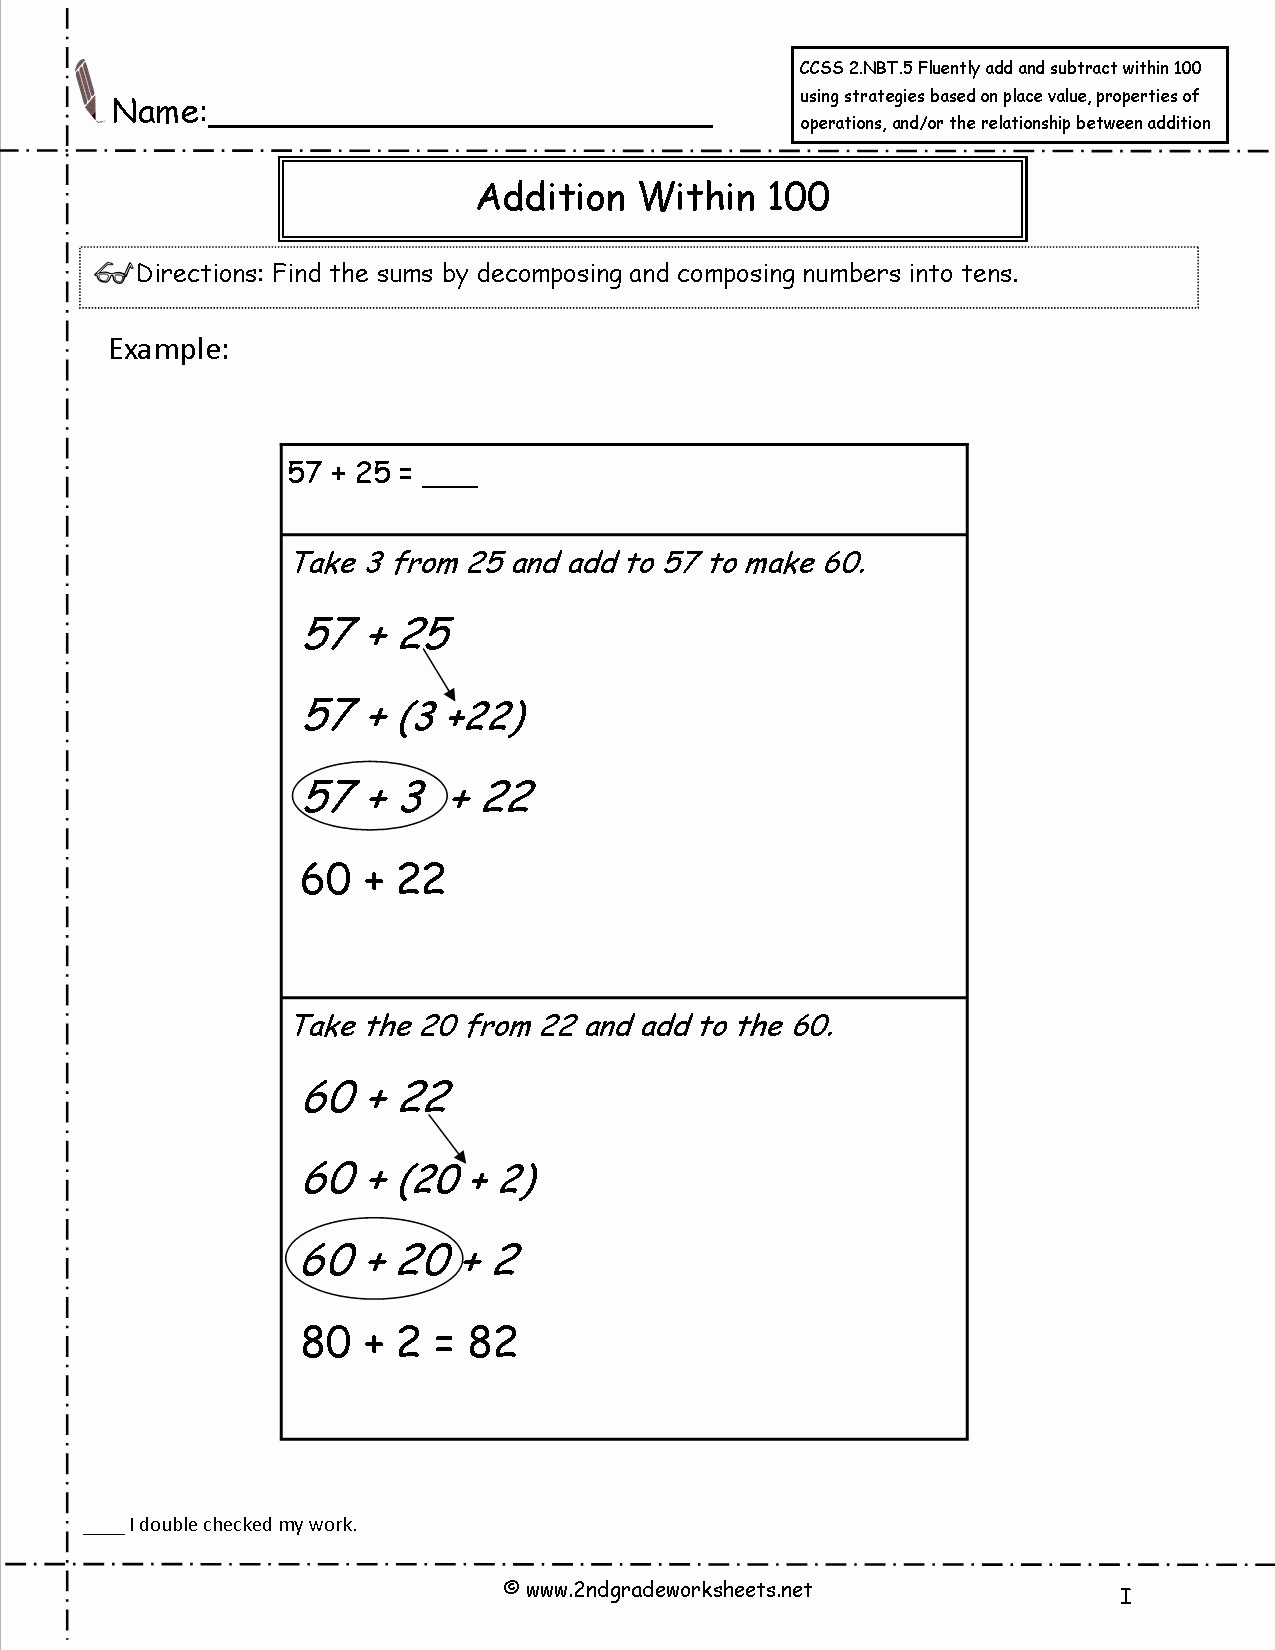 Fractions Common Core Worksheets Beautiful Fraction Word Problems 5th Grade Mon Core Worksheets